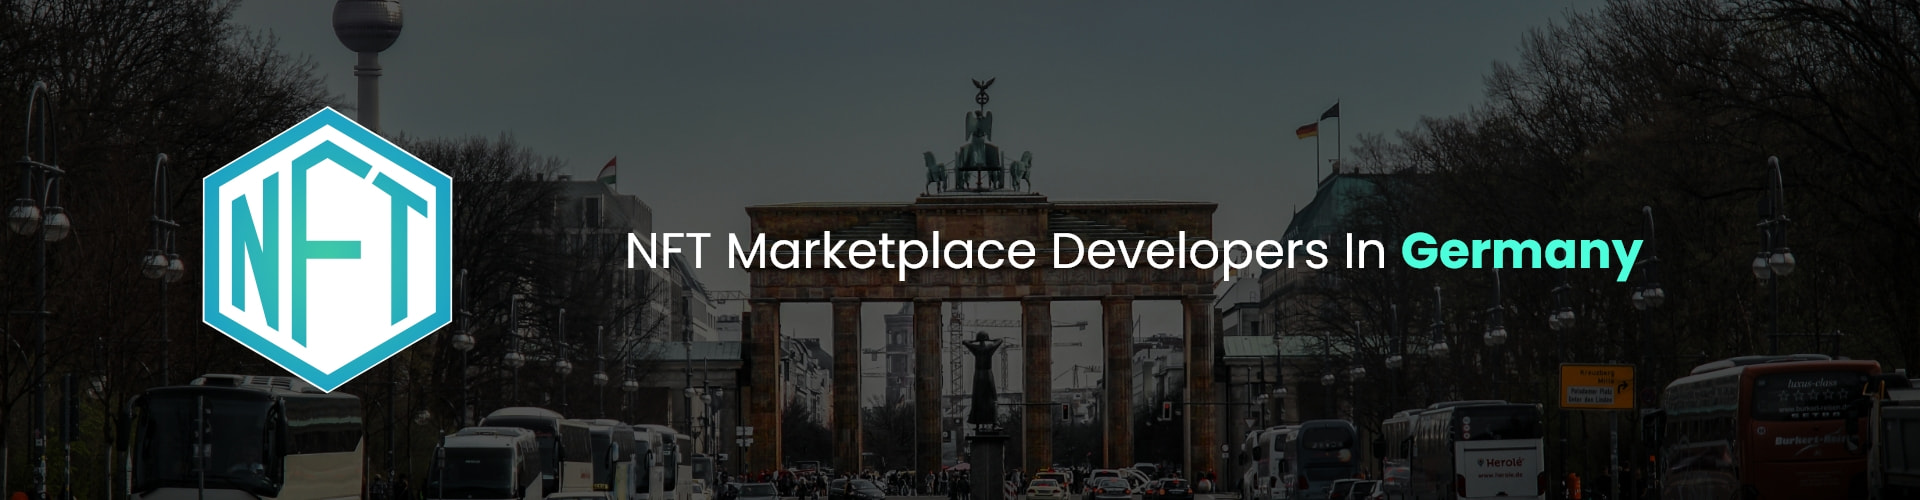 hire nft marketplace developers in Germany